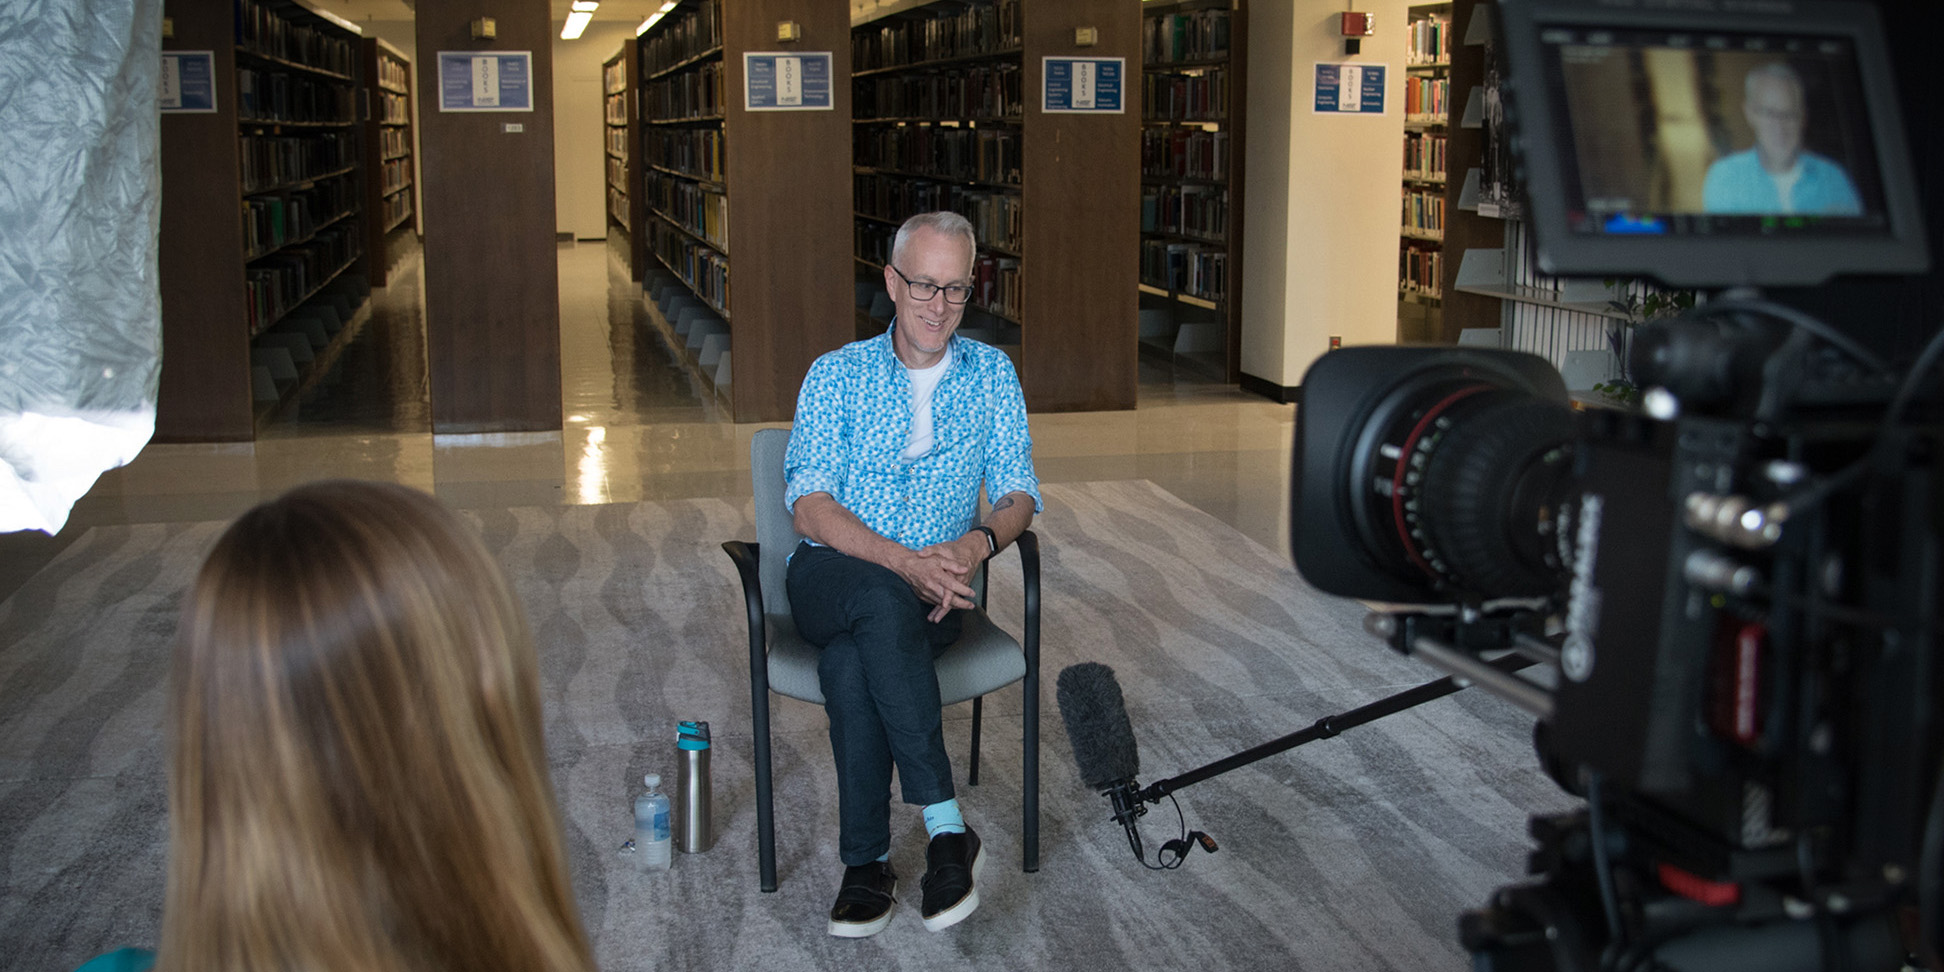 Jon Pratt, wearing a blue and white patterned shirt, sitting in a library in a chair with legs crossed, smiling to himself, with a film crew mostly out of frame in the foreground